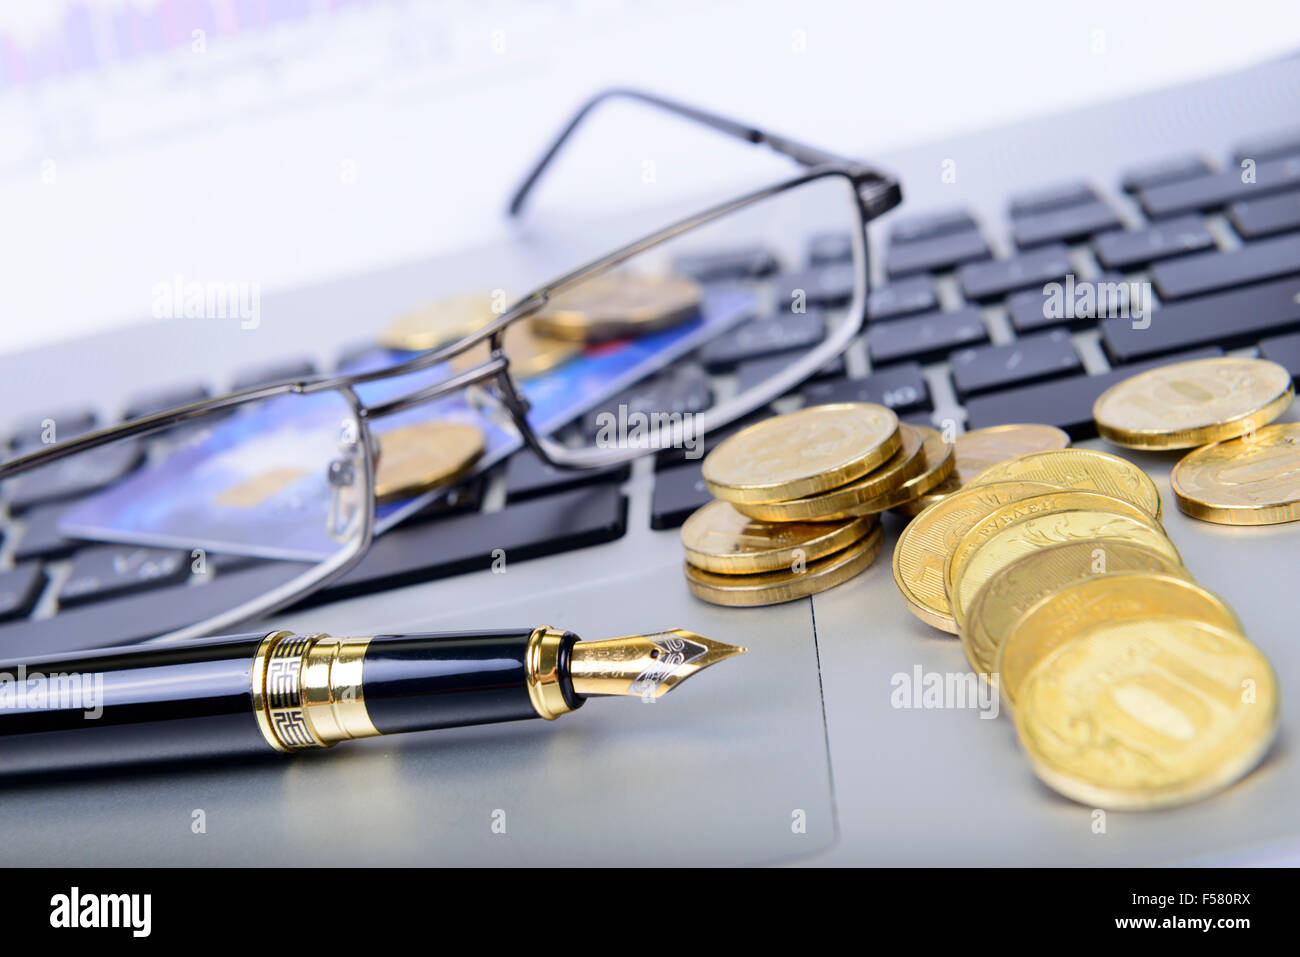 pen, coins, glasses and a bank card on the keyboard Stock Photo